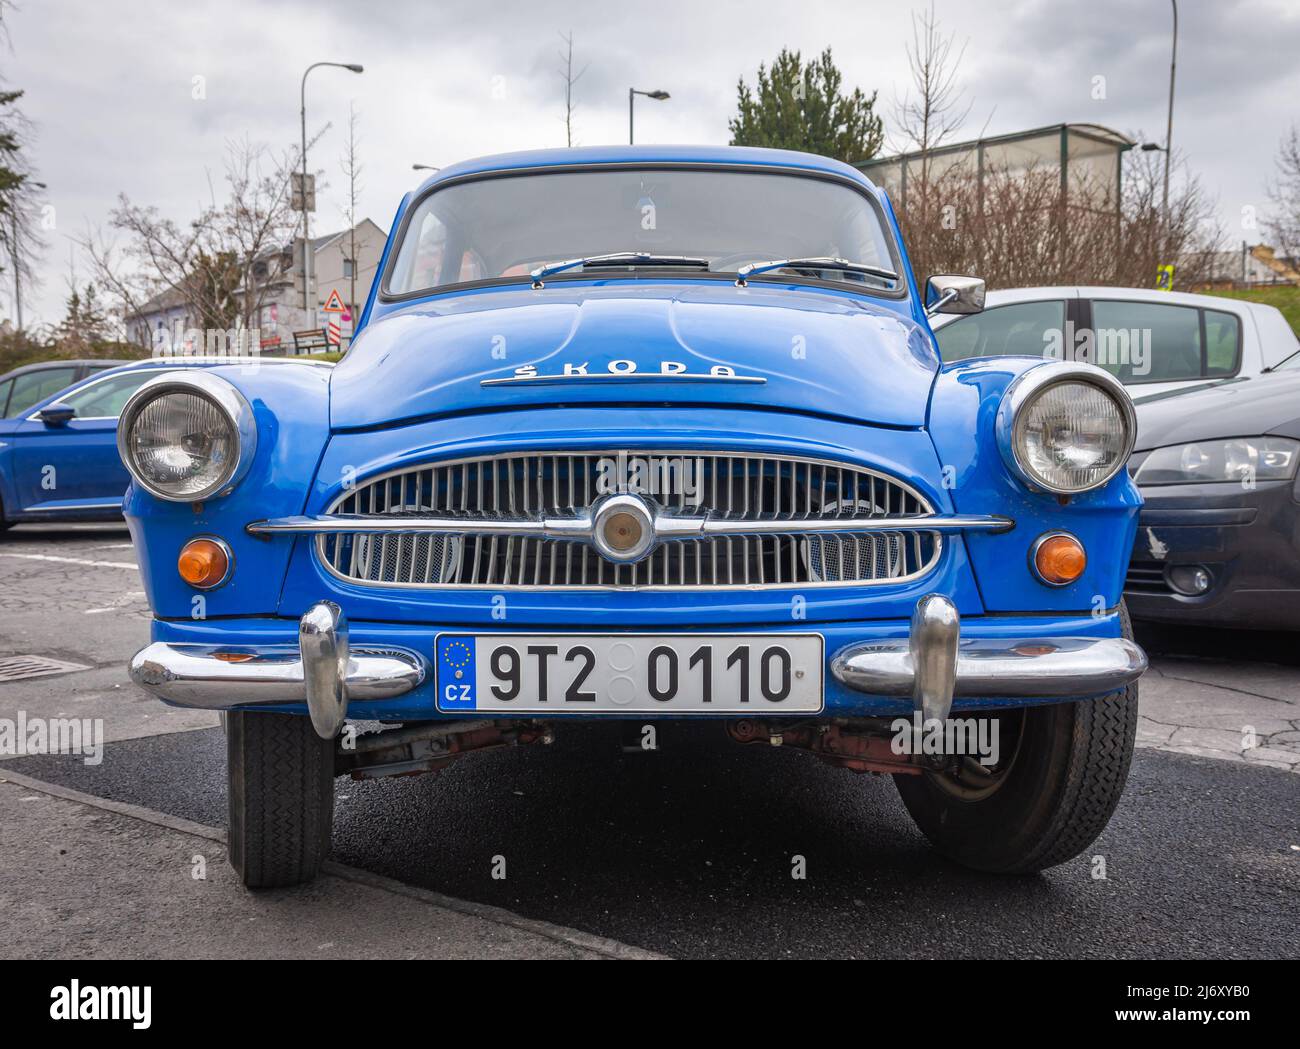 Bruntal, Czech Republic, 20.04.2022, Front view of vintage Skoda Octavia car in blue colour, which was produced in years 1959-1971 Stock Photo